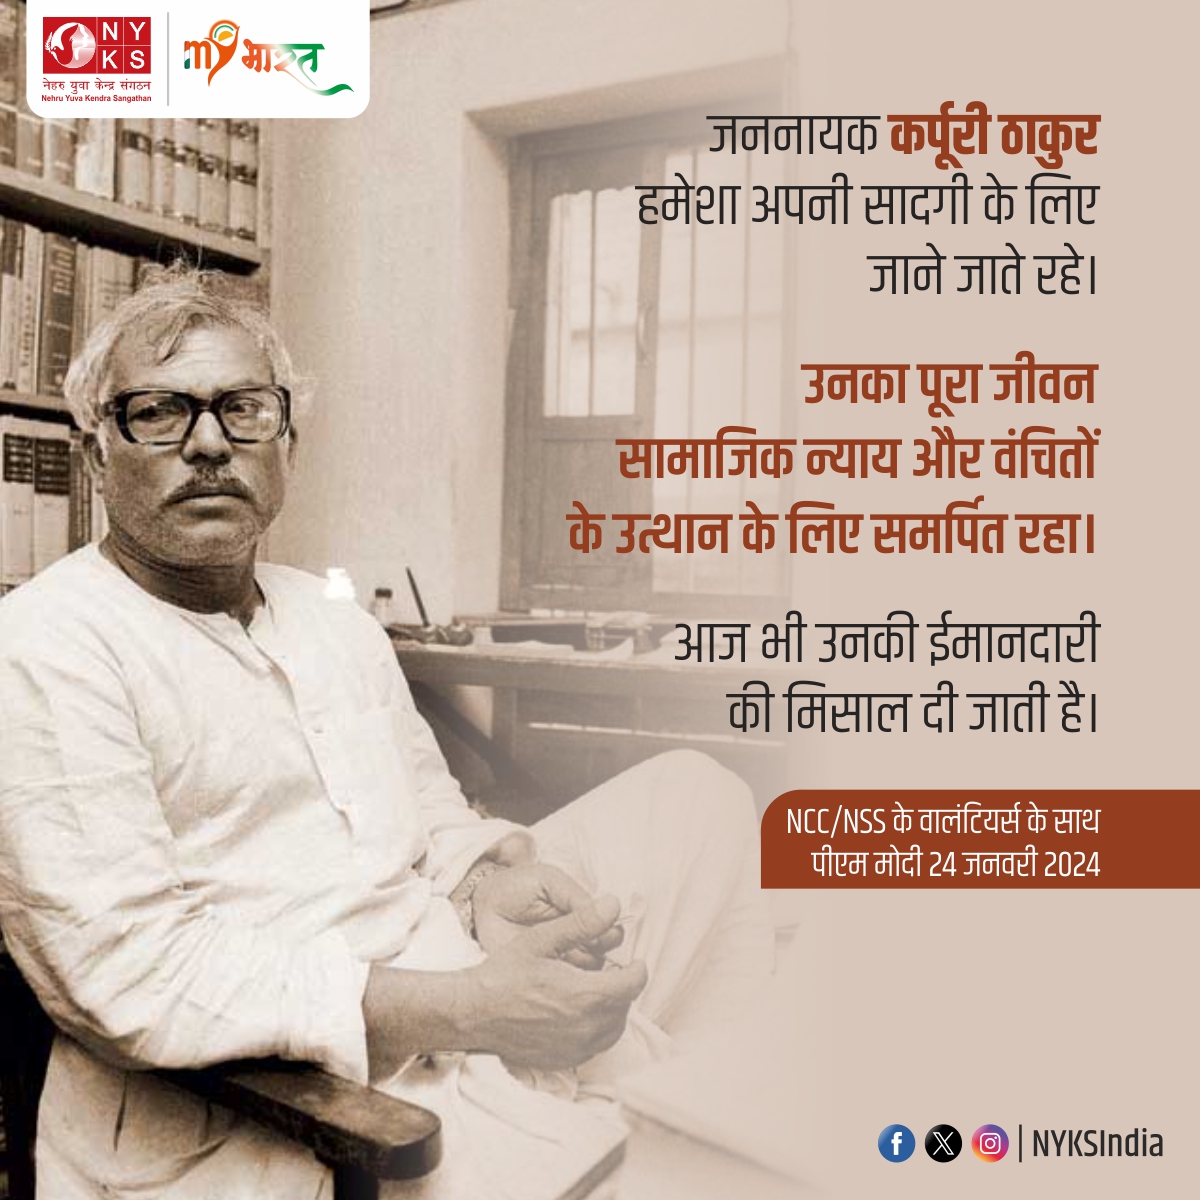 Karpoori Thakur was known for his advocacy of social justice and the upliftment of the marginalized sections of society. His commitment to the welfare of the downtrodden led him to become a prominent leader of the socialist movement in Bihar. #KarpooriThakur #NYKS #Bihar